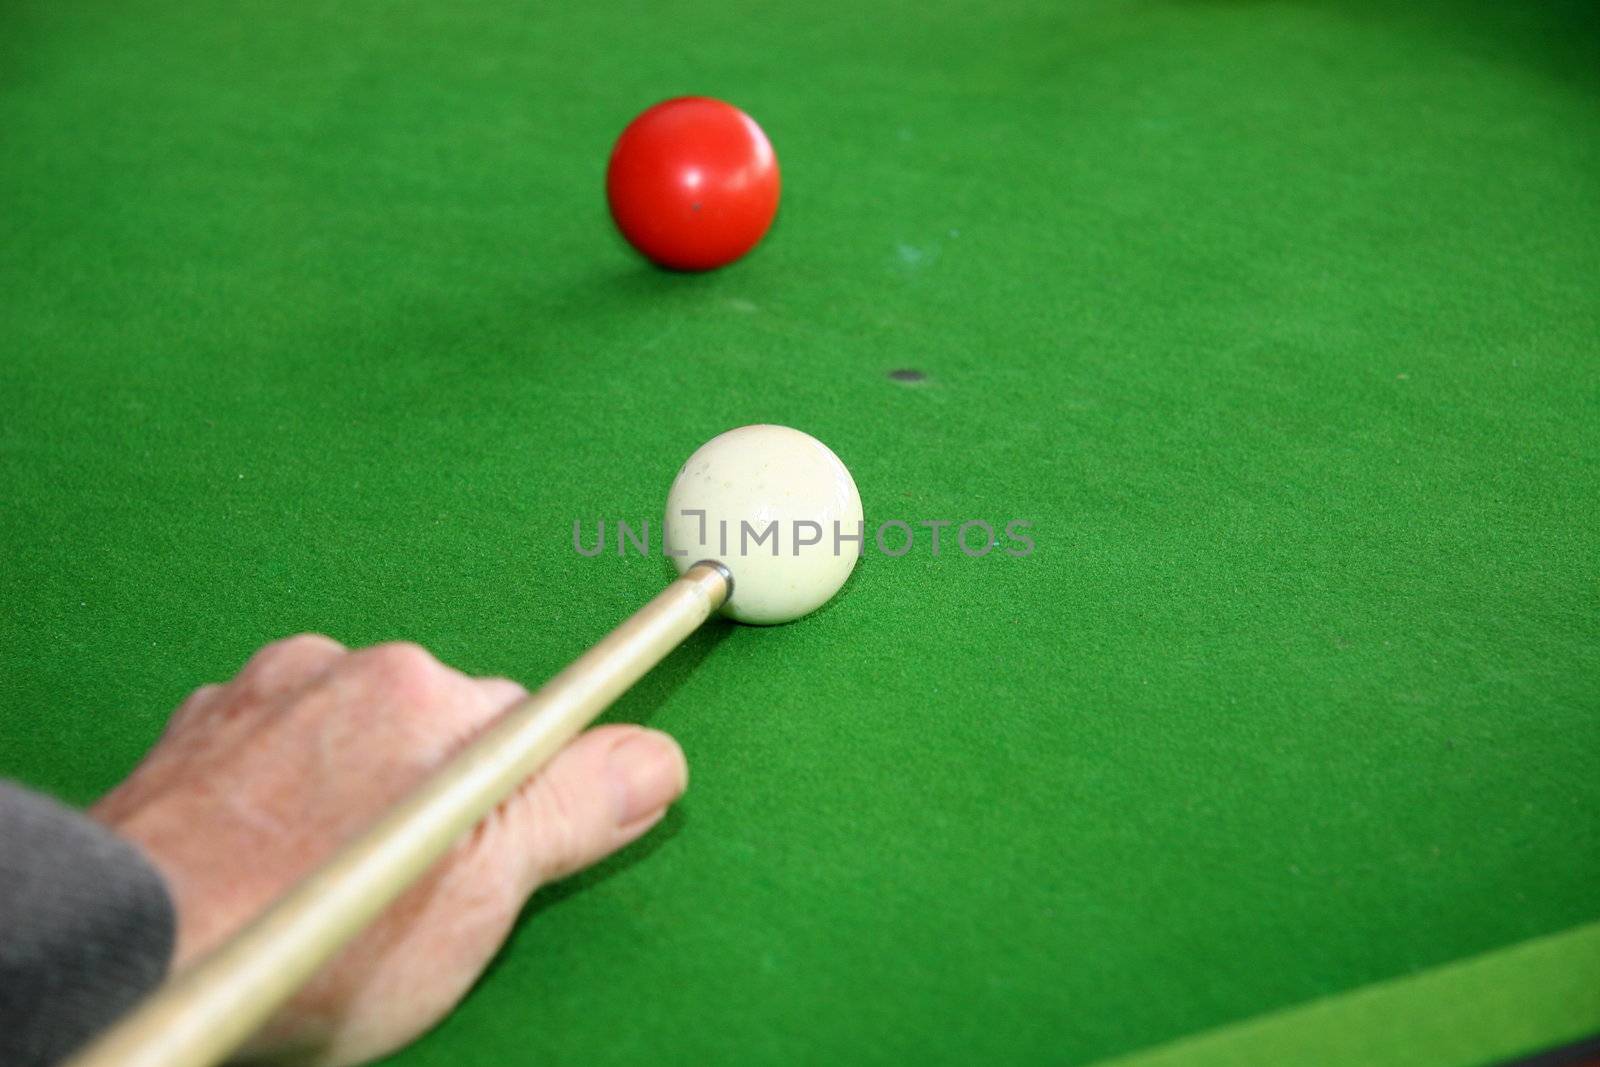 player cueing the white ball for the next shot